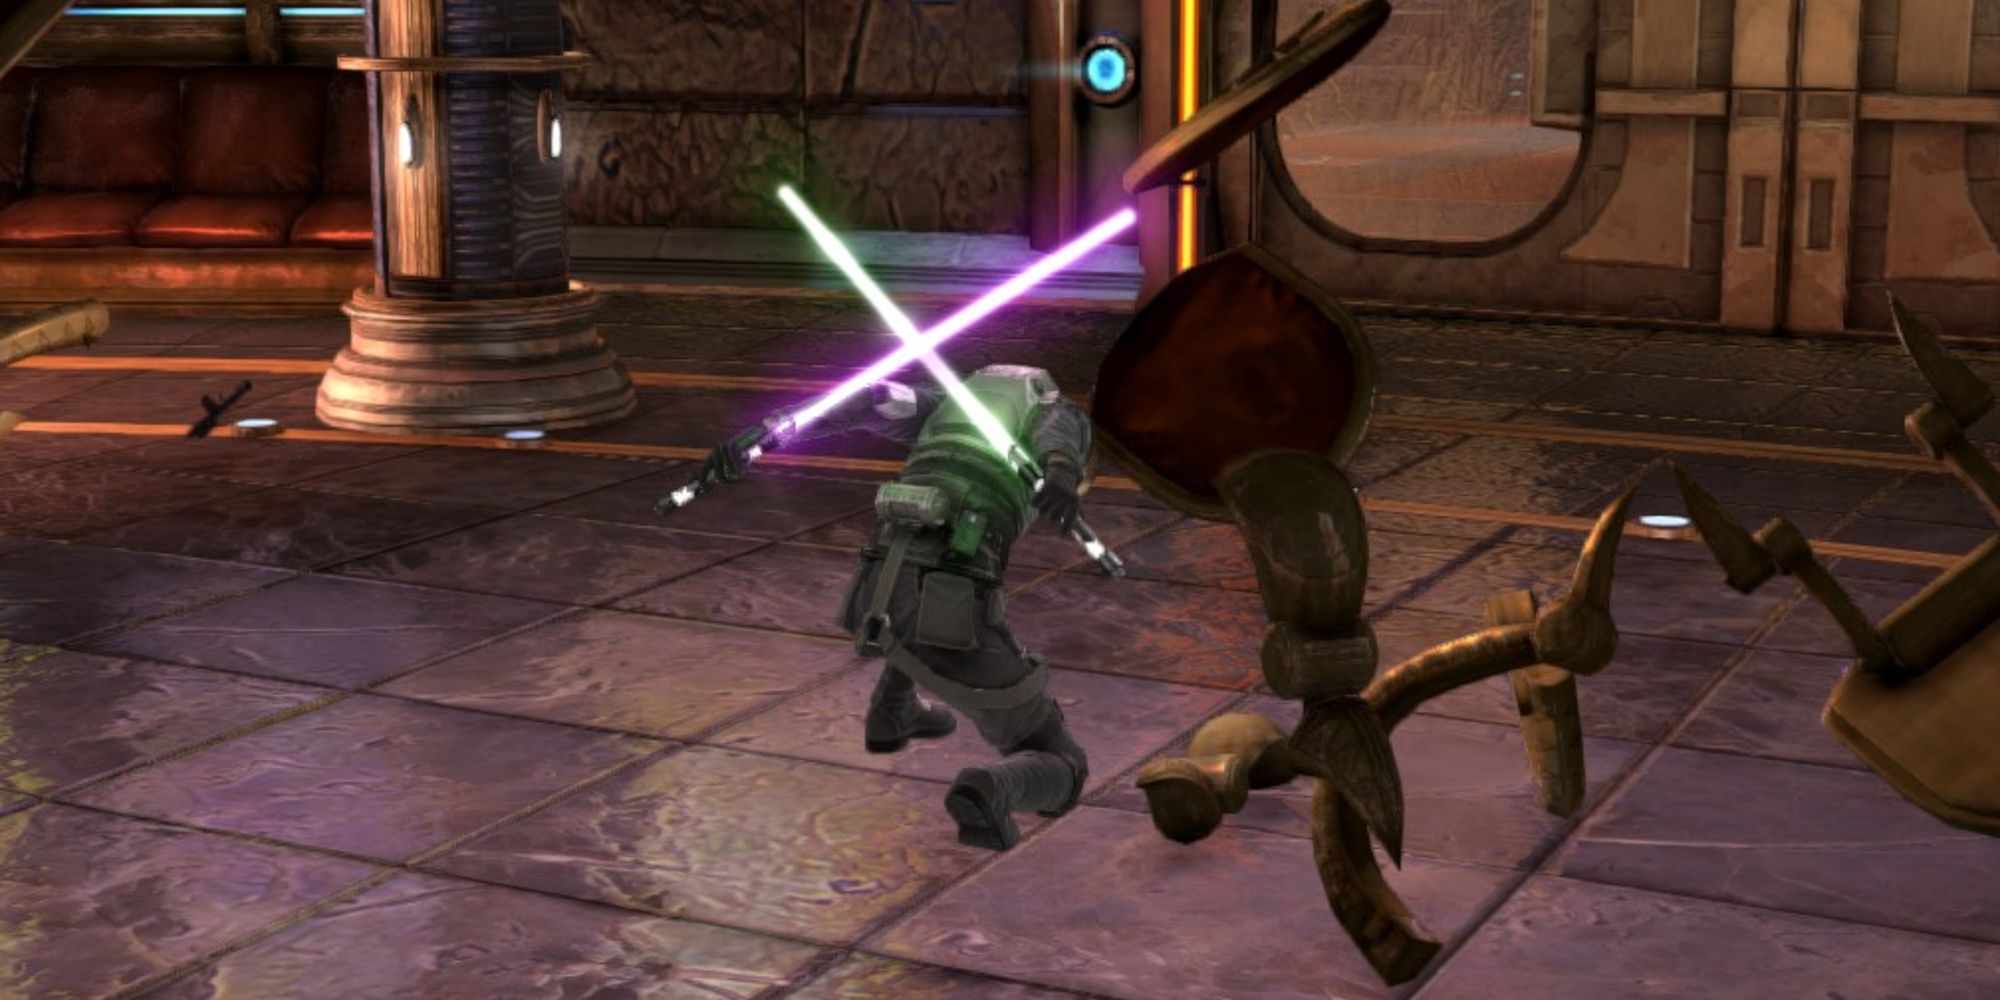 Starkiller landing with green and purple lightsabers in The Force Unleashed II